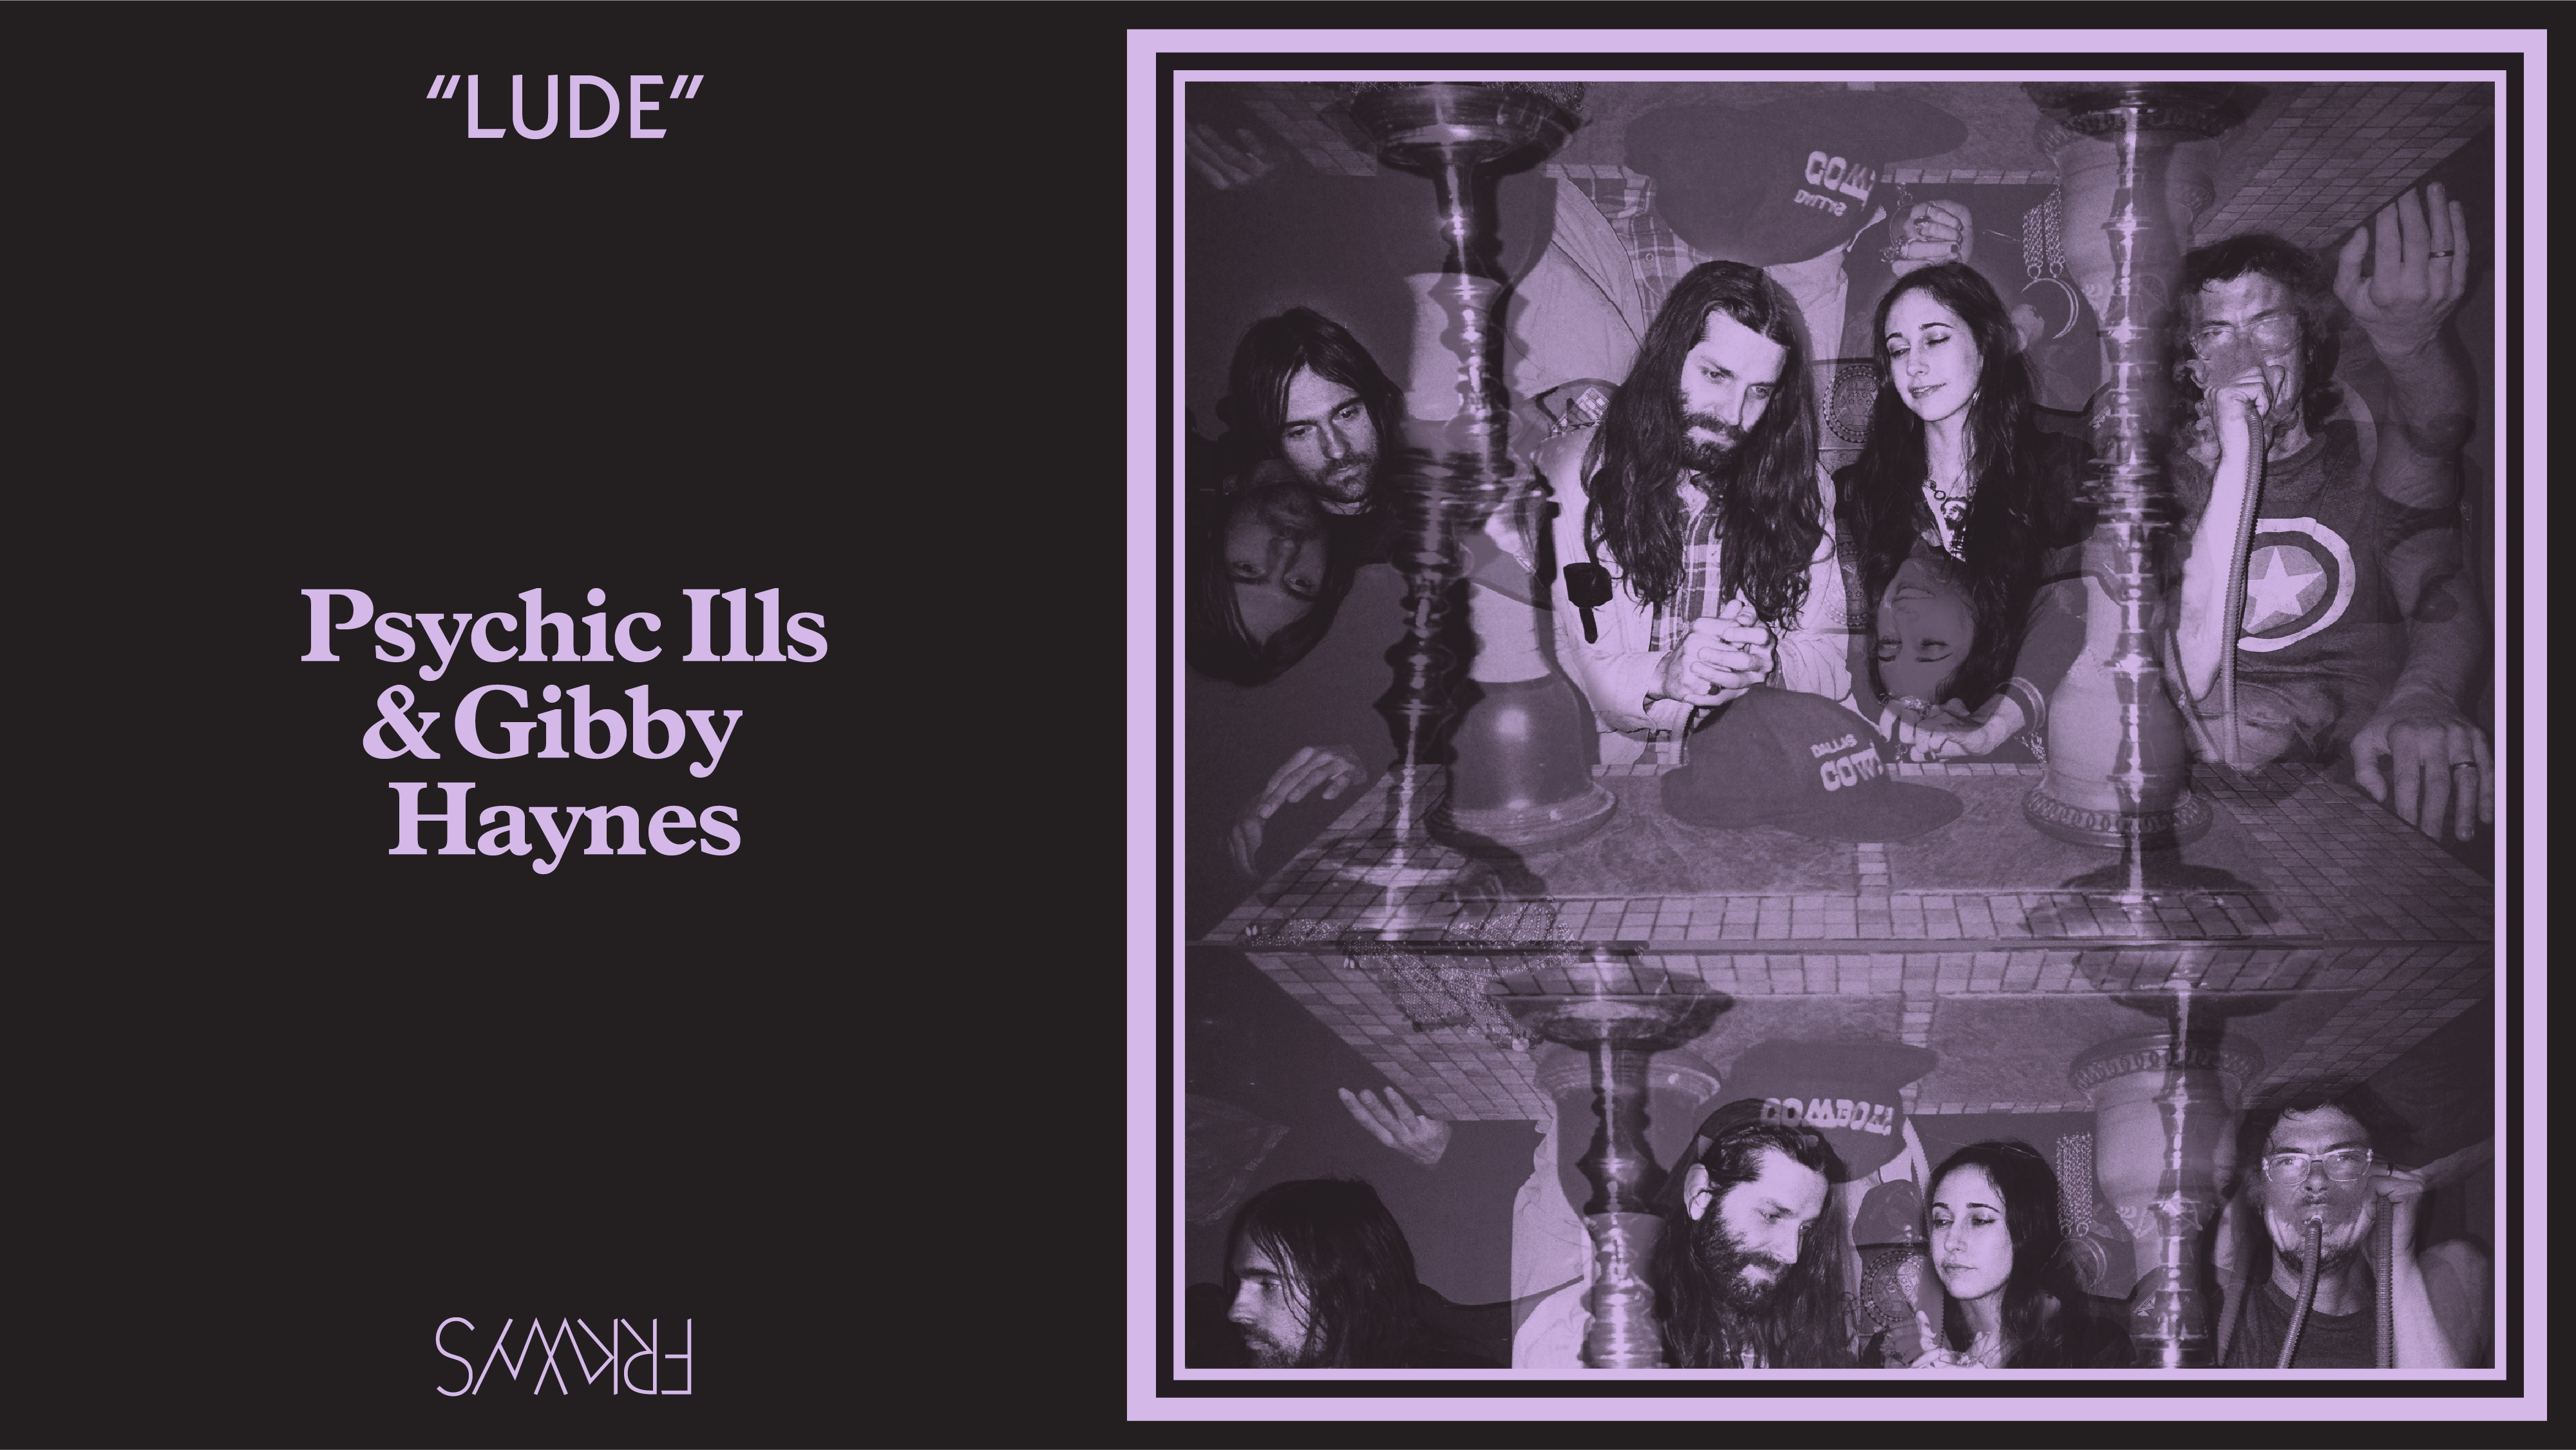 Link to Video for Psychic Ills & Gibby Haynes – Lude [Official Audio]